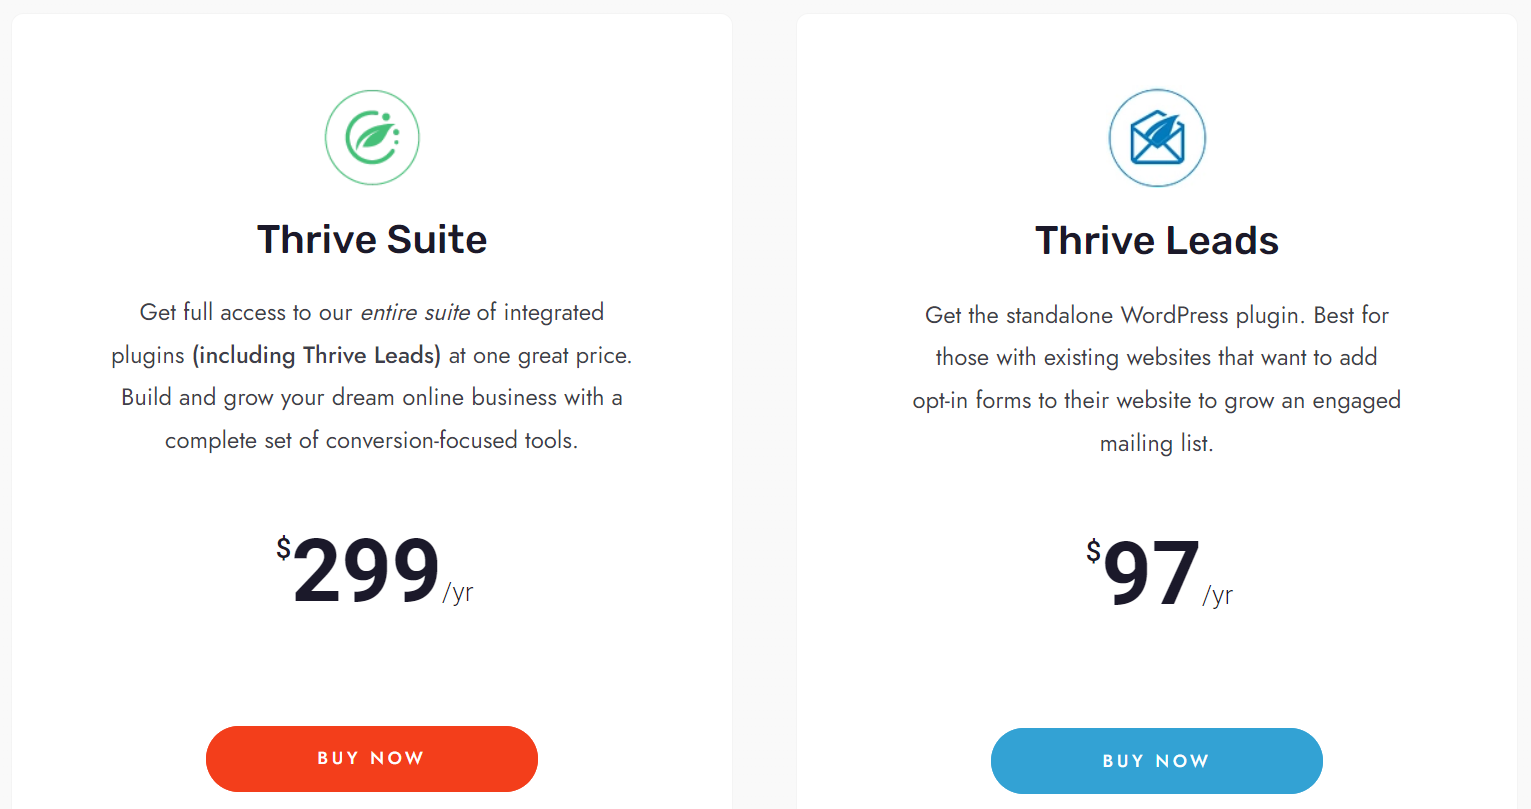 Thrive leads pricing